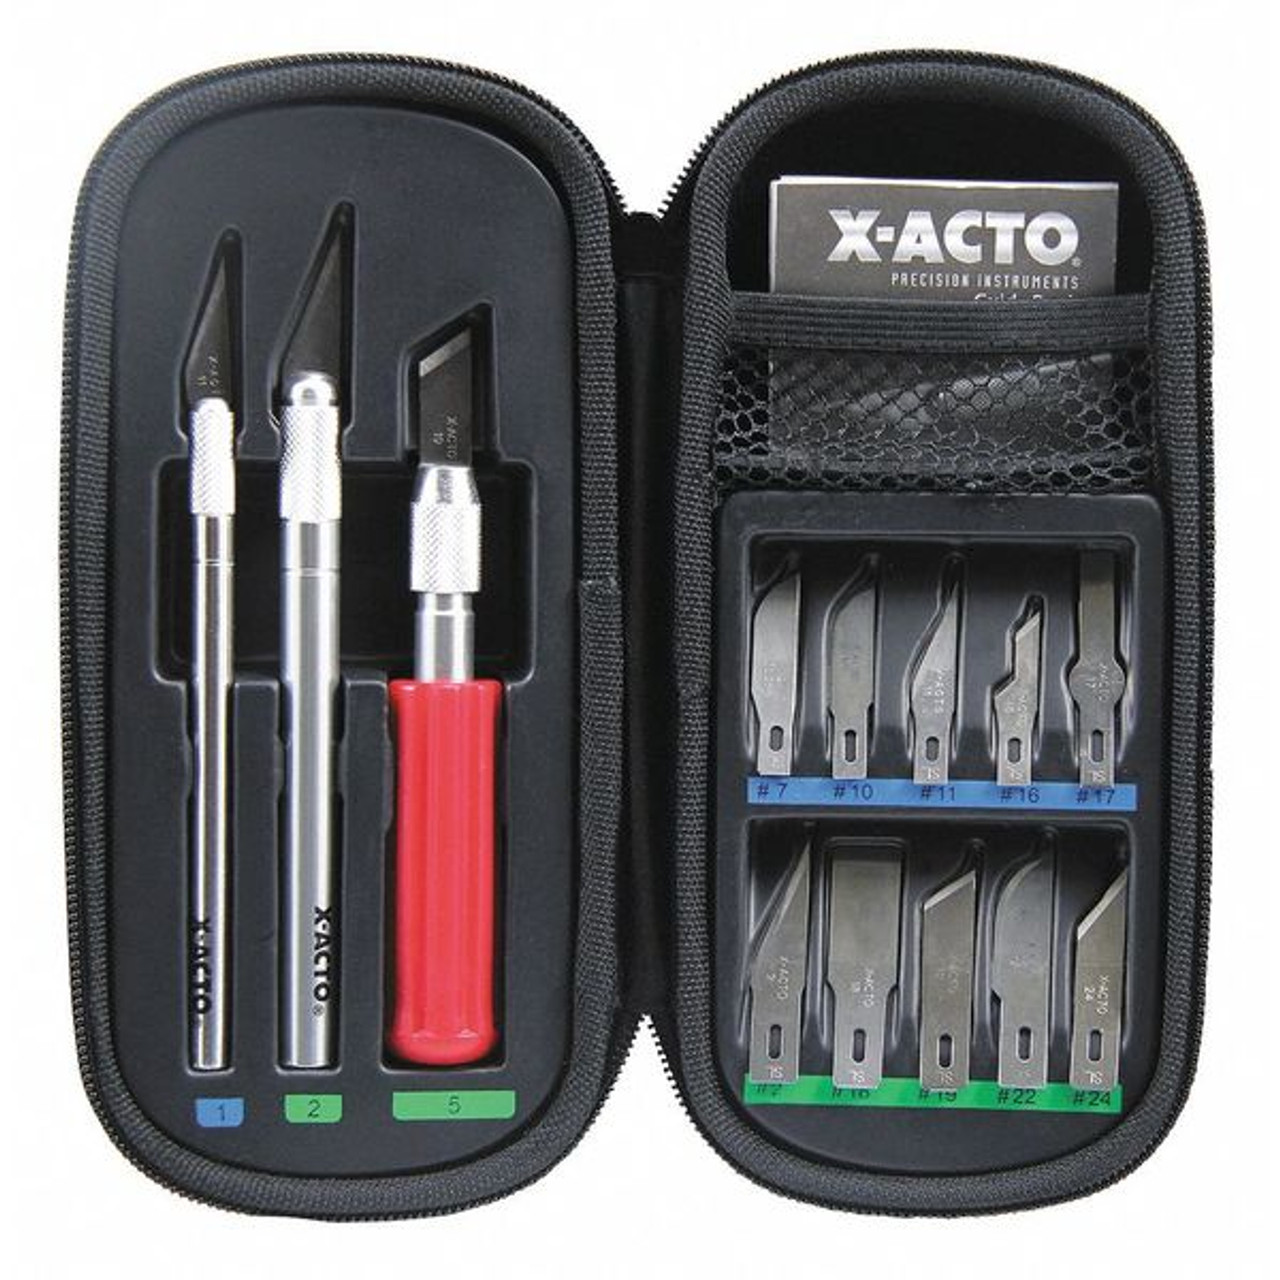 Elmer's X-Acto Basic Knife Set, Cutting, Trimming, Sculpting, Carving 13  Blades